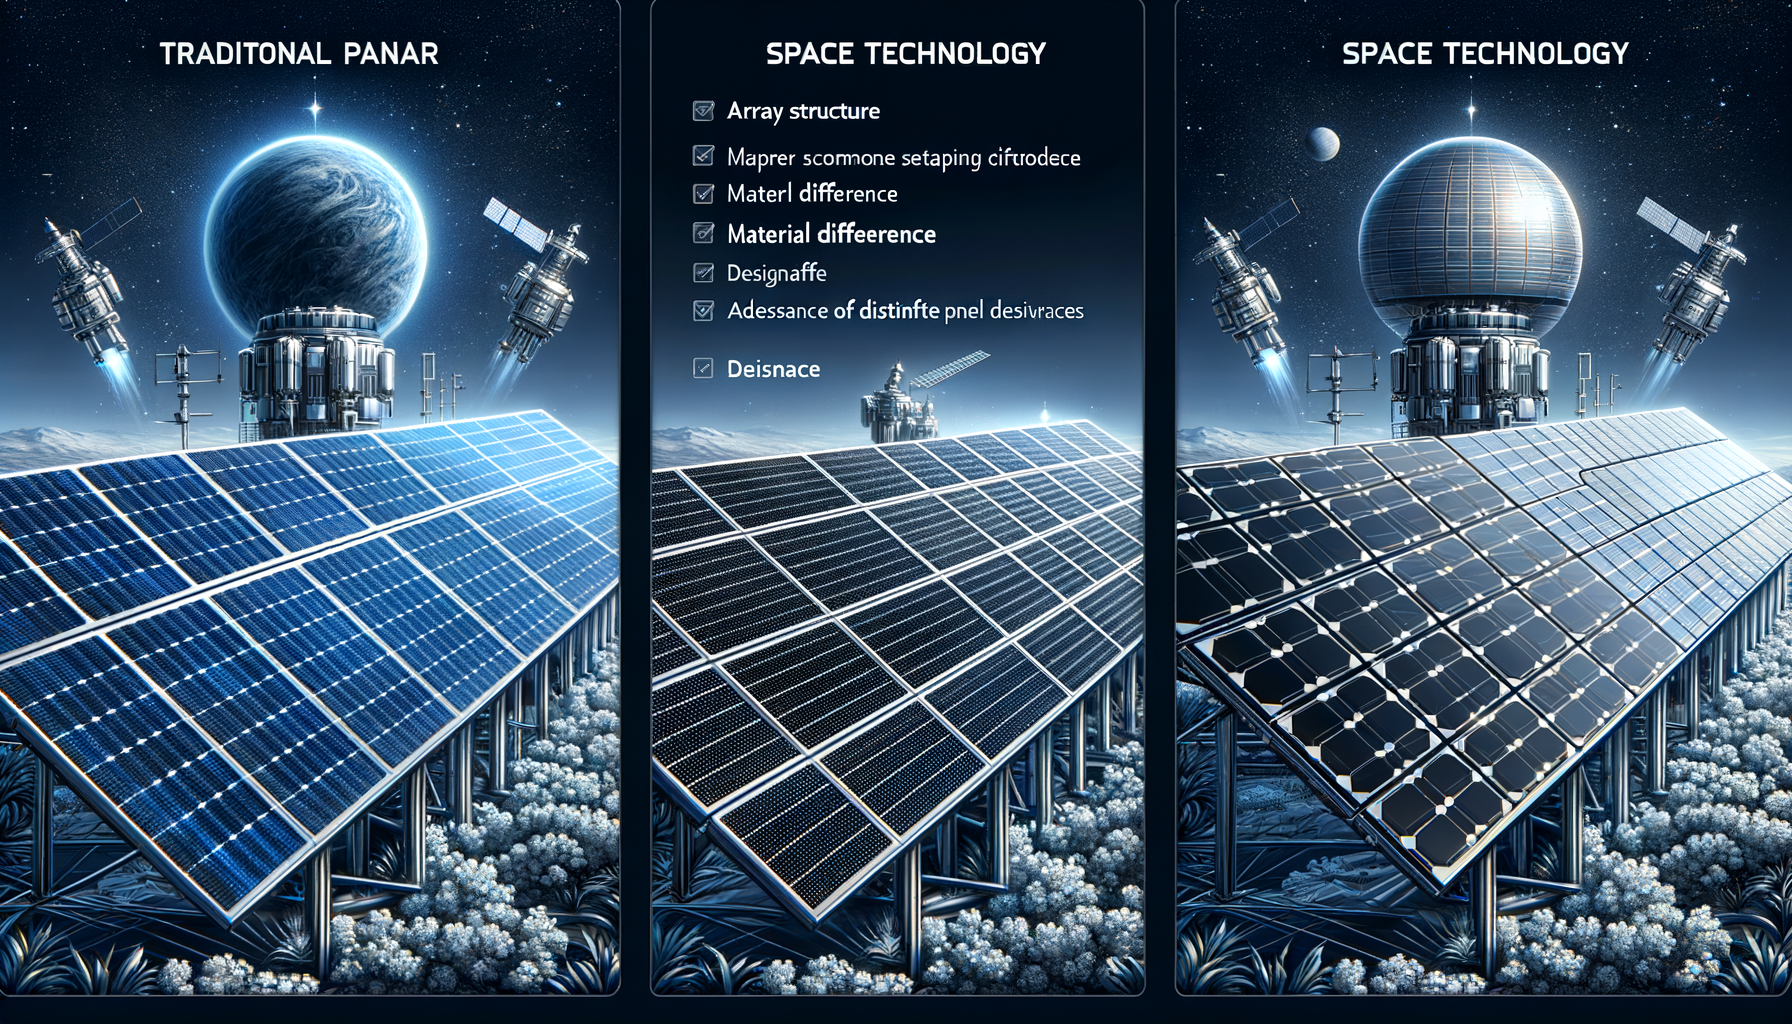 ALT: Comparison of traditional and space technology solar panels